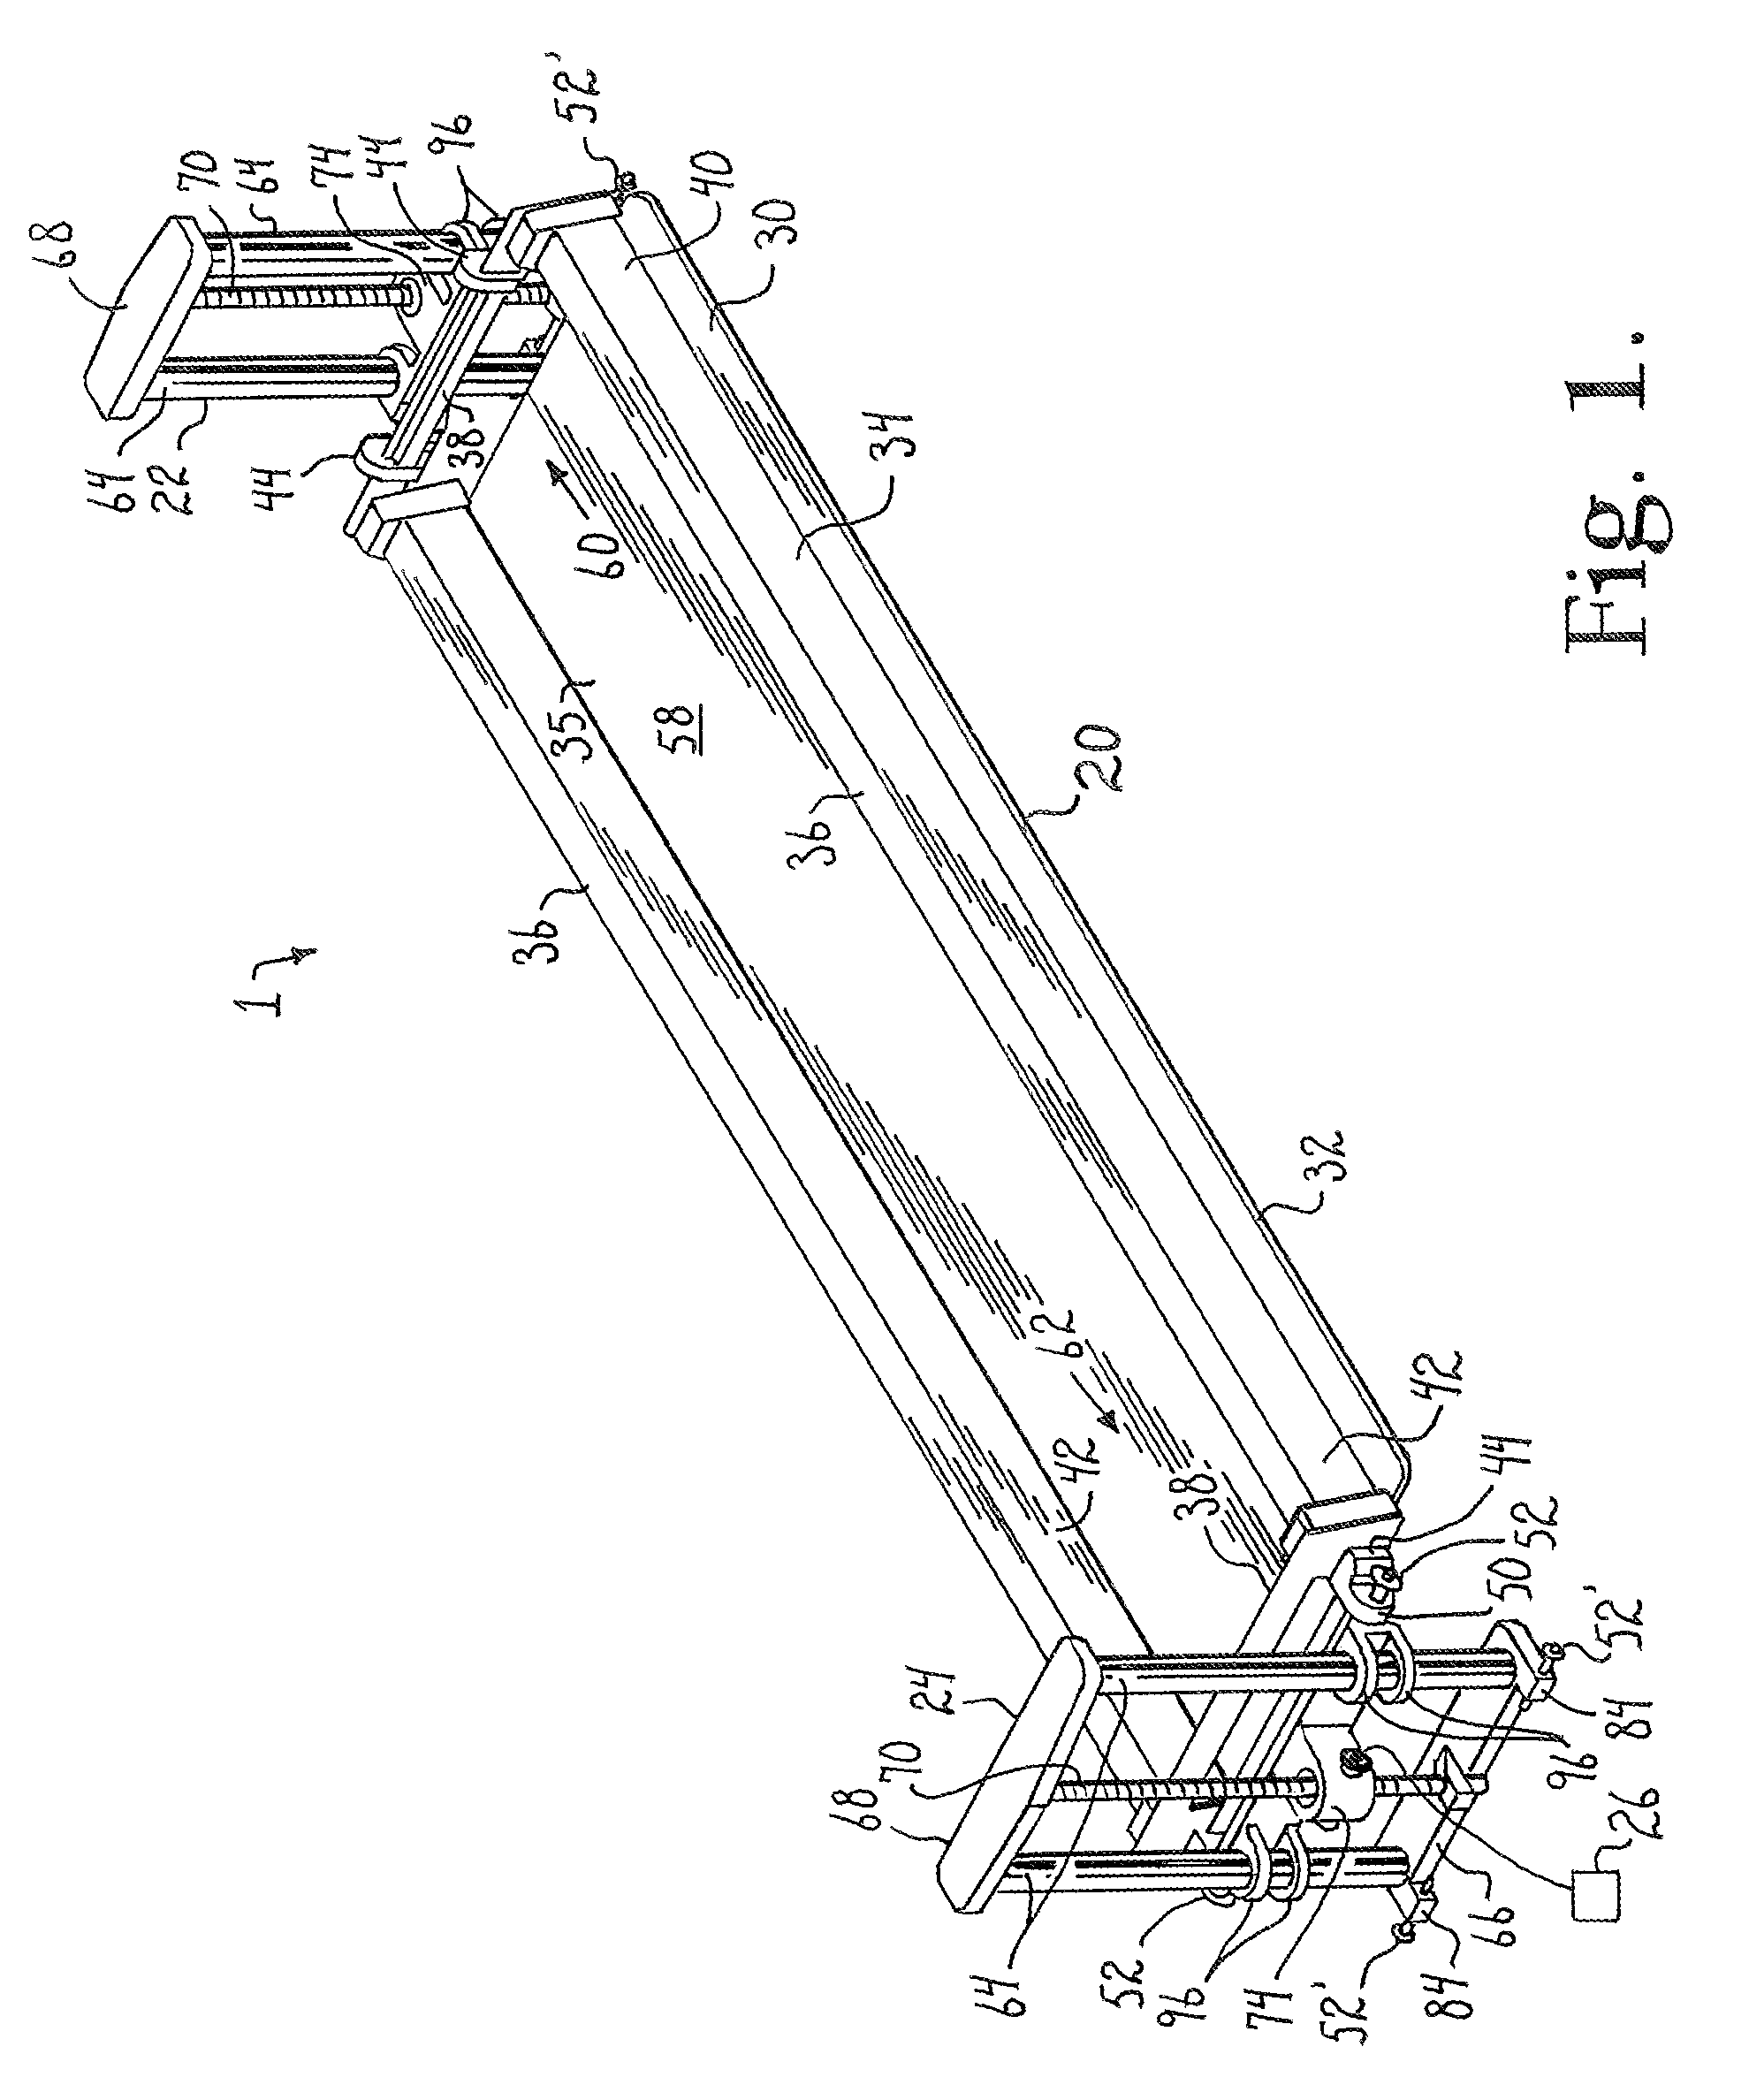 Synchronized patient elevation and positioning apparatus for use with patient positioning support systems